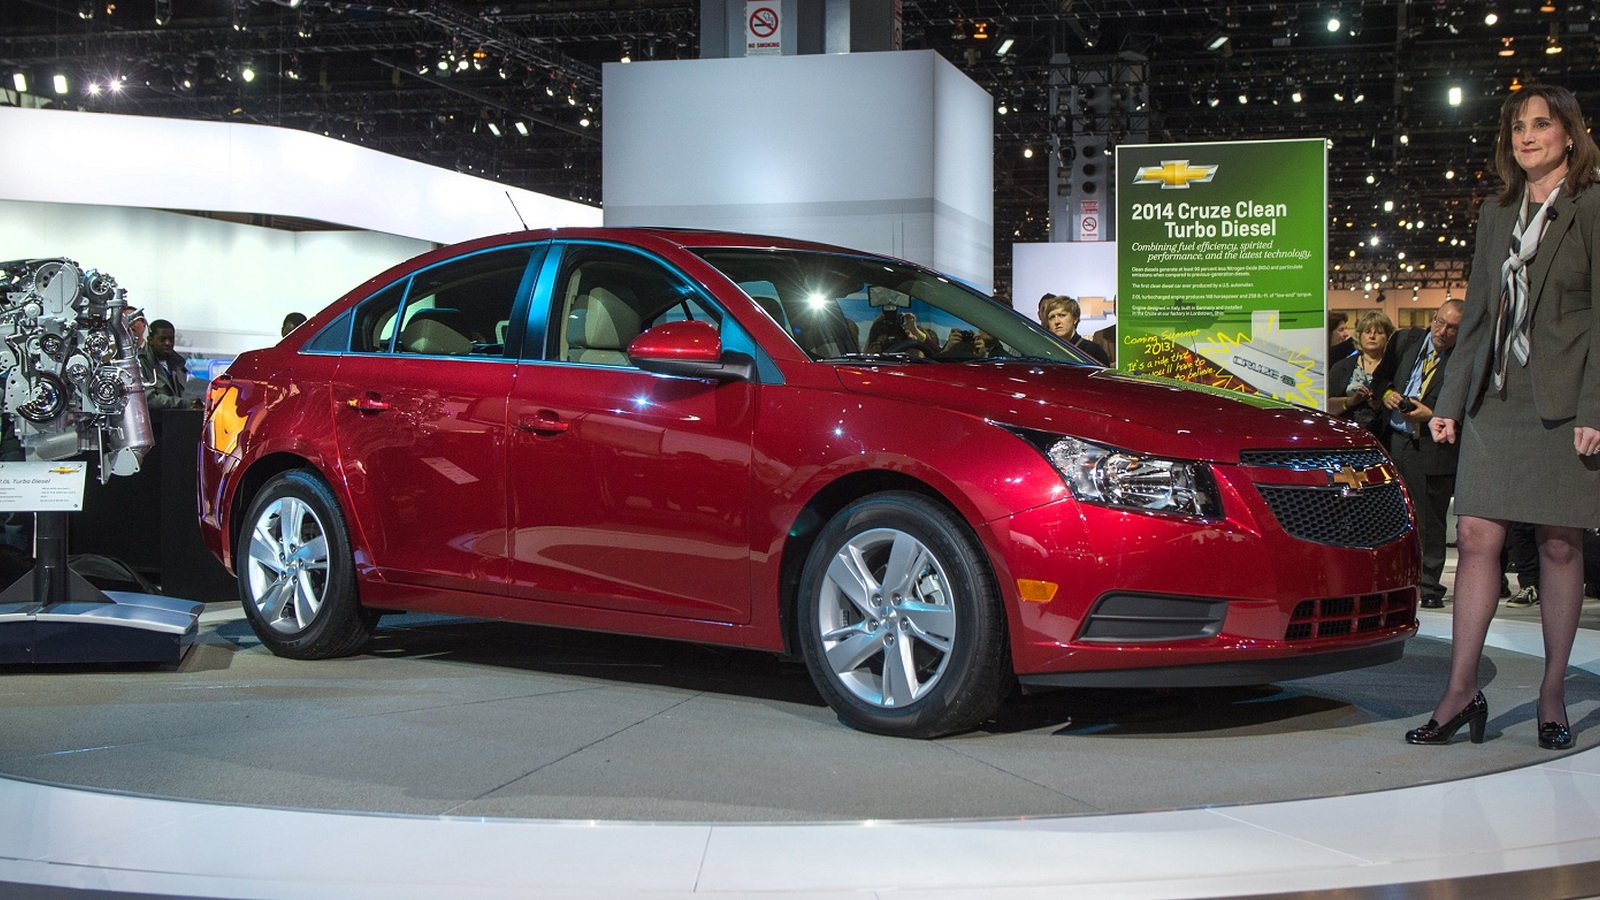 2014 Chevrolet Cruze Clean Turbo Diesel, 2013 Chicago Auto Show [photo: Brian Kersey for Chevrolet]